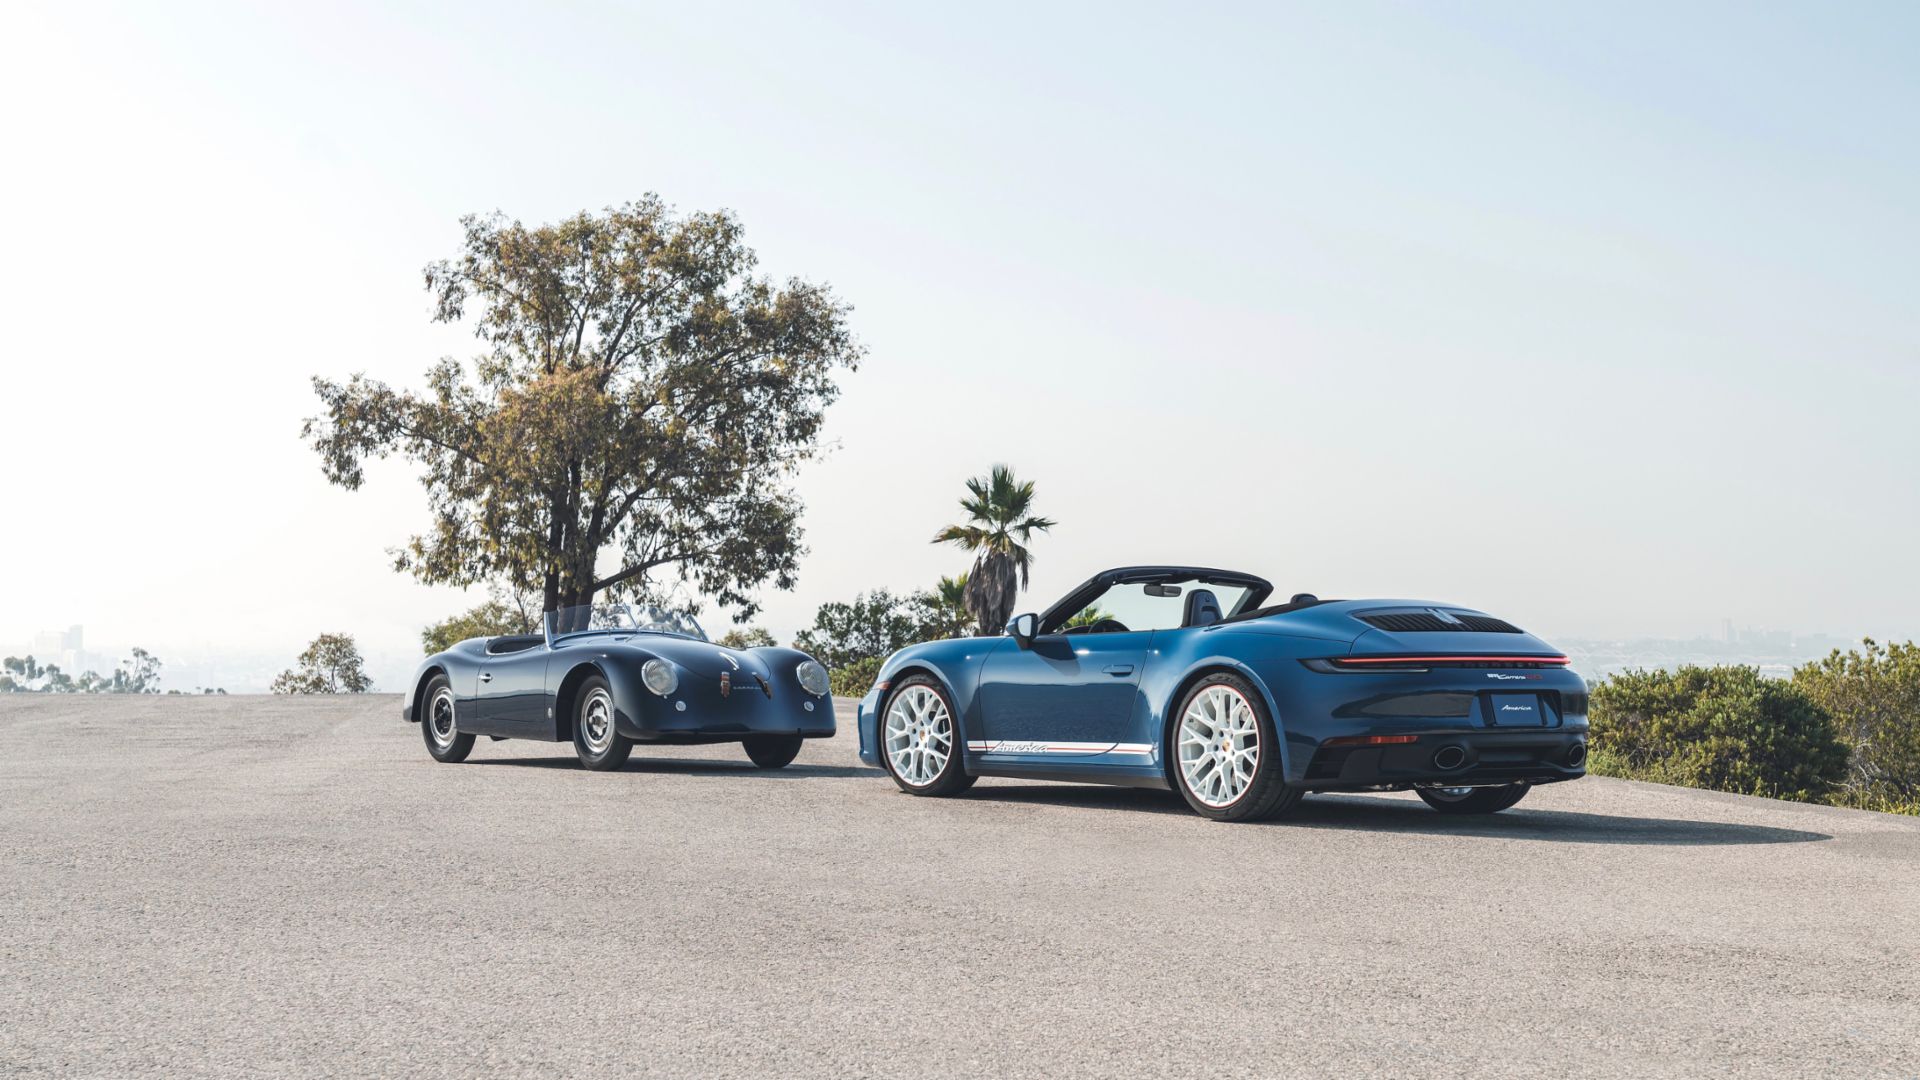 2023 Porsche 911 Cabriolet America Edition and 1953 Porshe 356 America Roadster Parked face to face